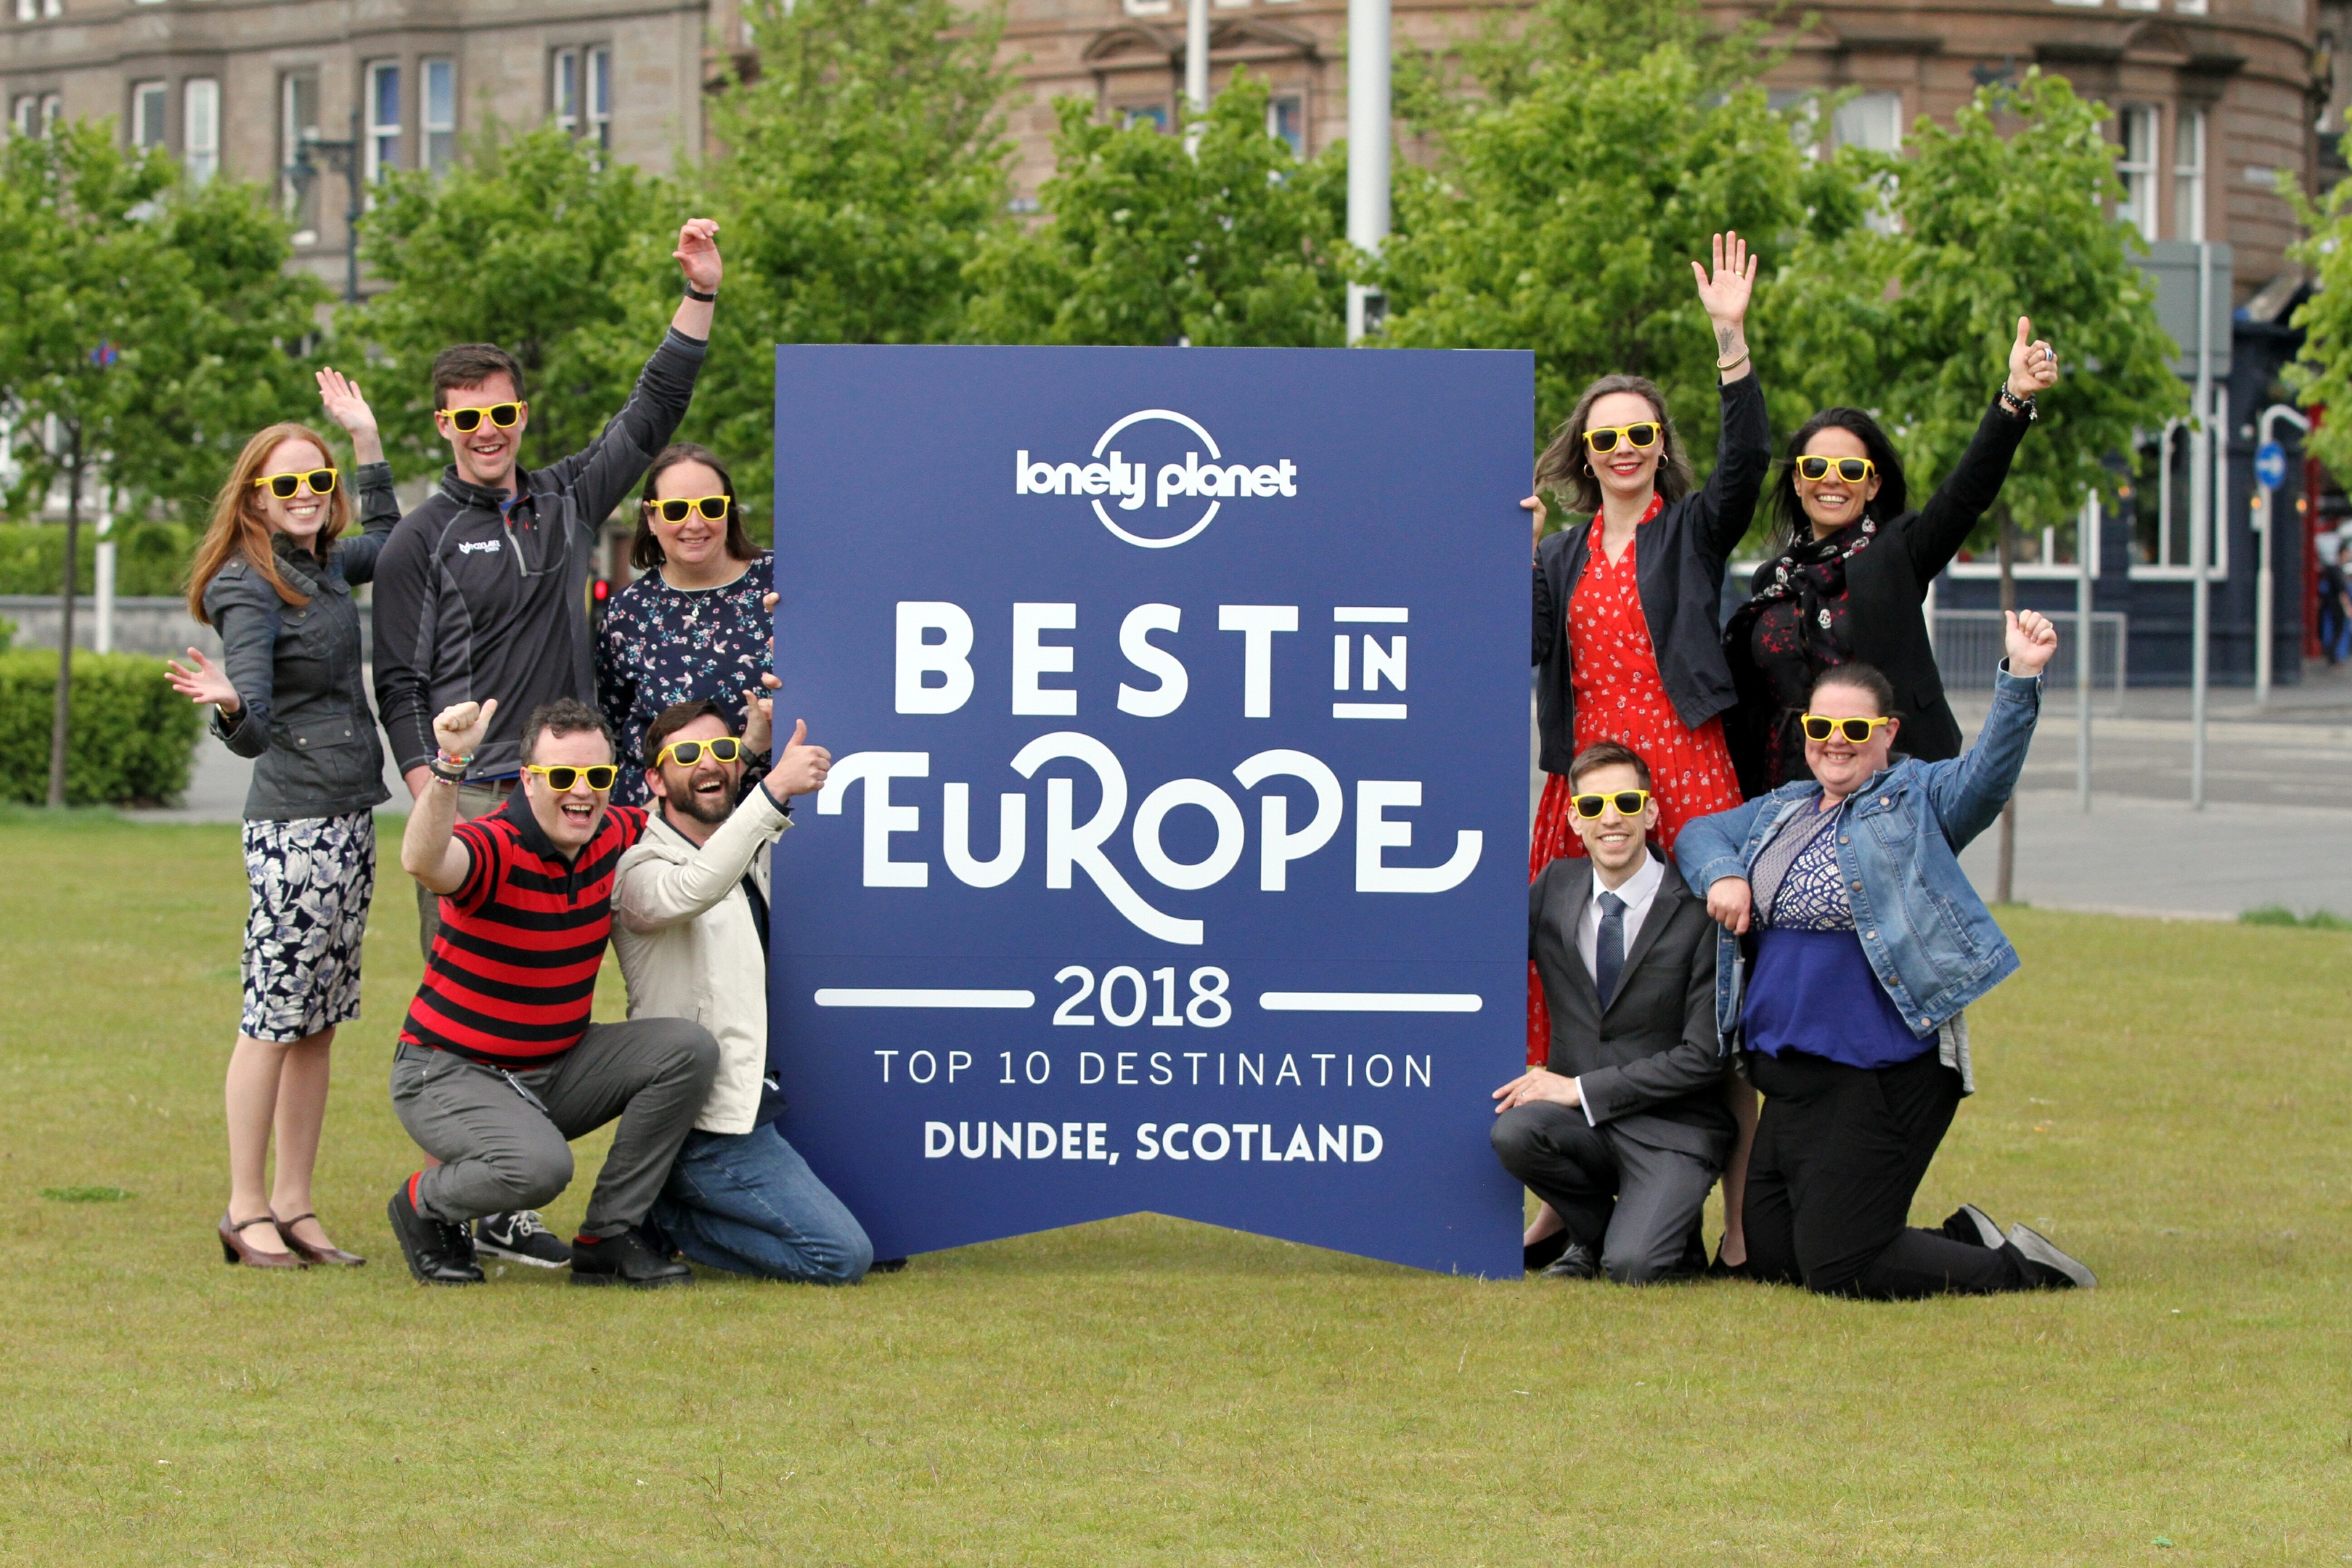 Local tourism leaders celebrate Dundee being named among the Best in Europe 2018 at Slessor Gardens